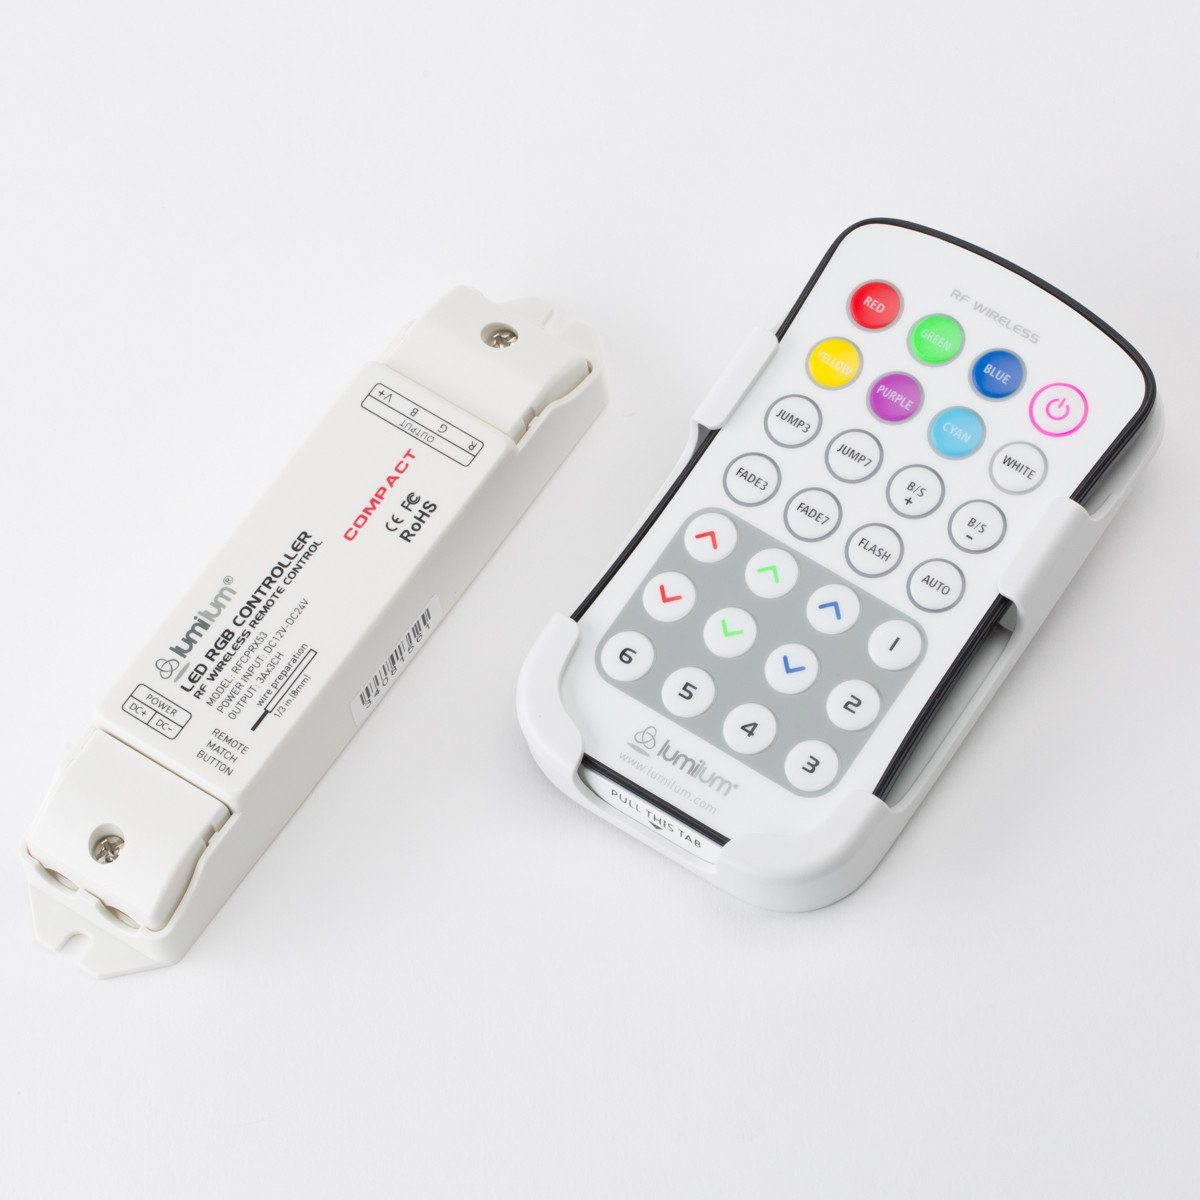 Lumilum Radio Frequency RGB Remote Control and Receiver for LED Strip Lights – 32 Colors and Brightness – Long Range, Certified, Commercial Grade